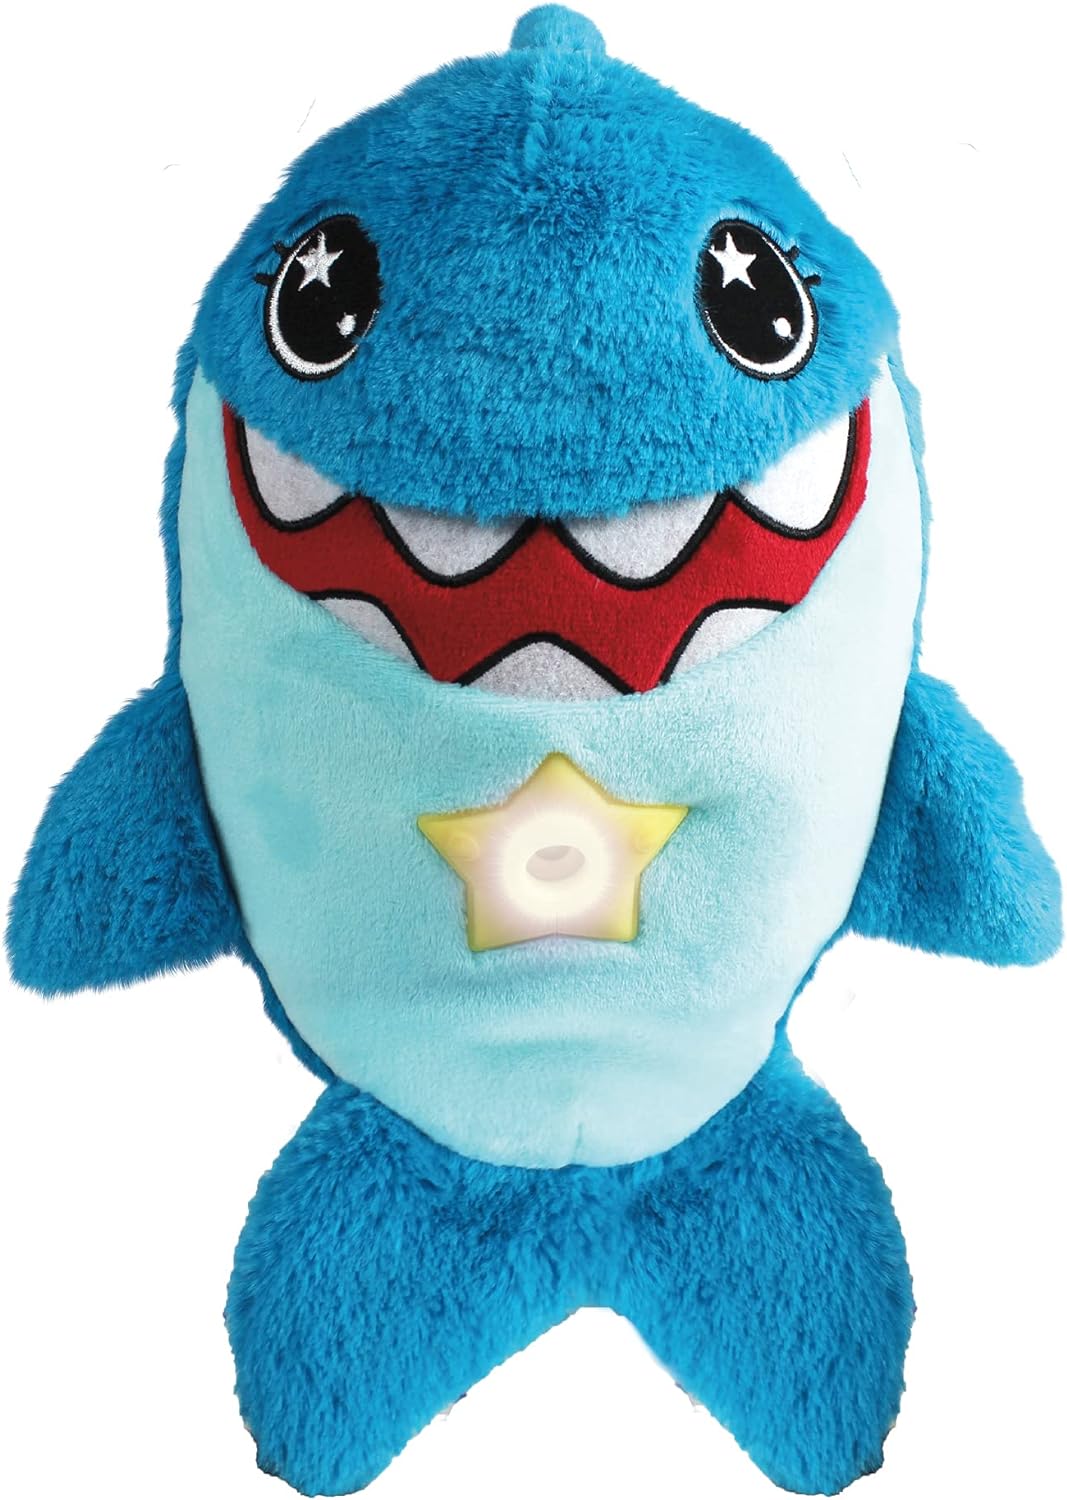 Ontel Star Belly Lites Cuddly Stuffed Animal Night Light: Snuggly Blue Shark $18.00, Pretty Pink Kitty $18.18 & More + Free Shipping w/ Prime or on $35+